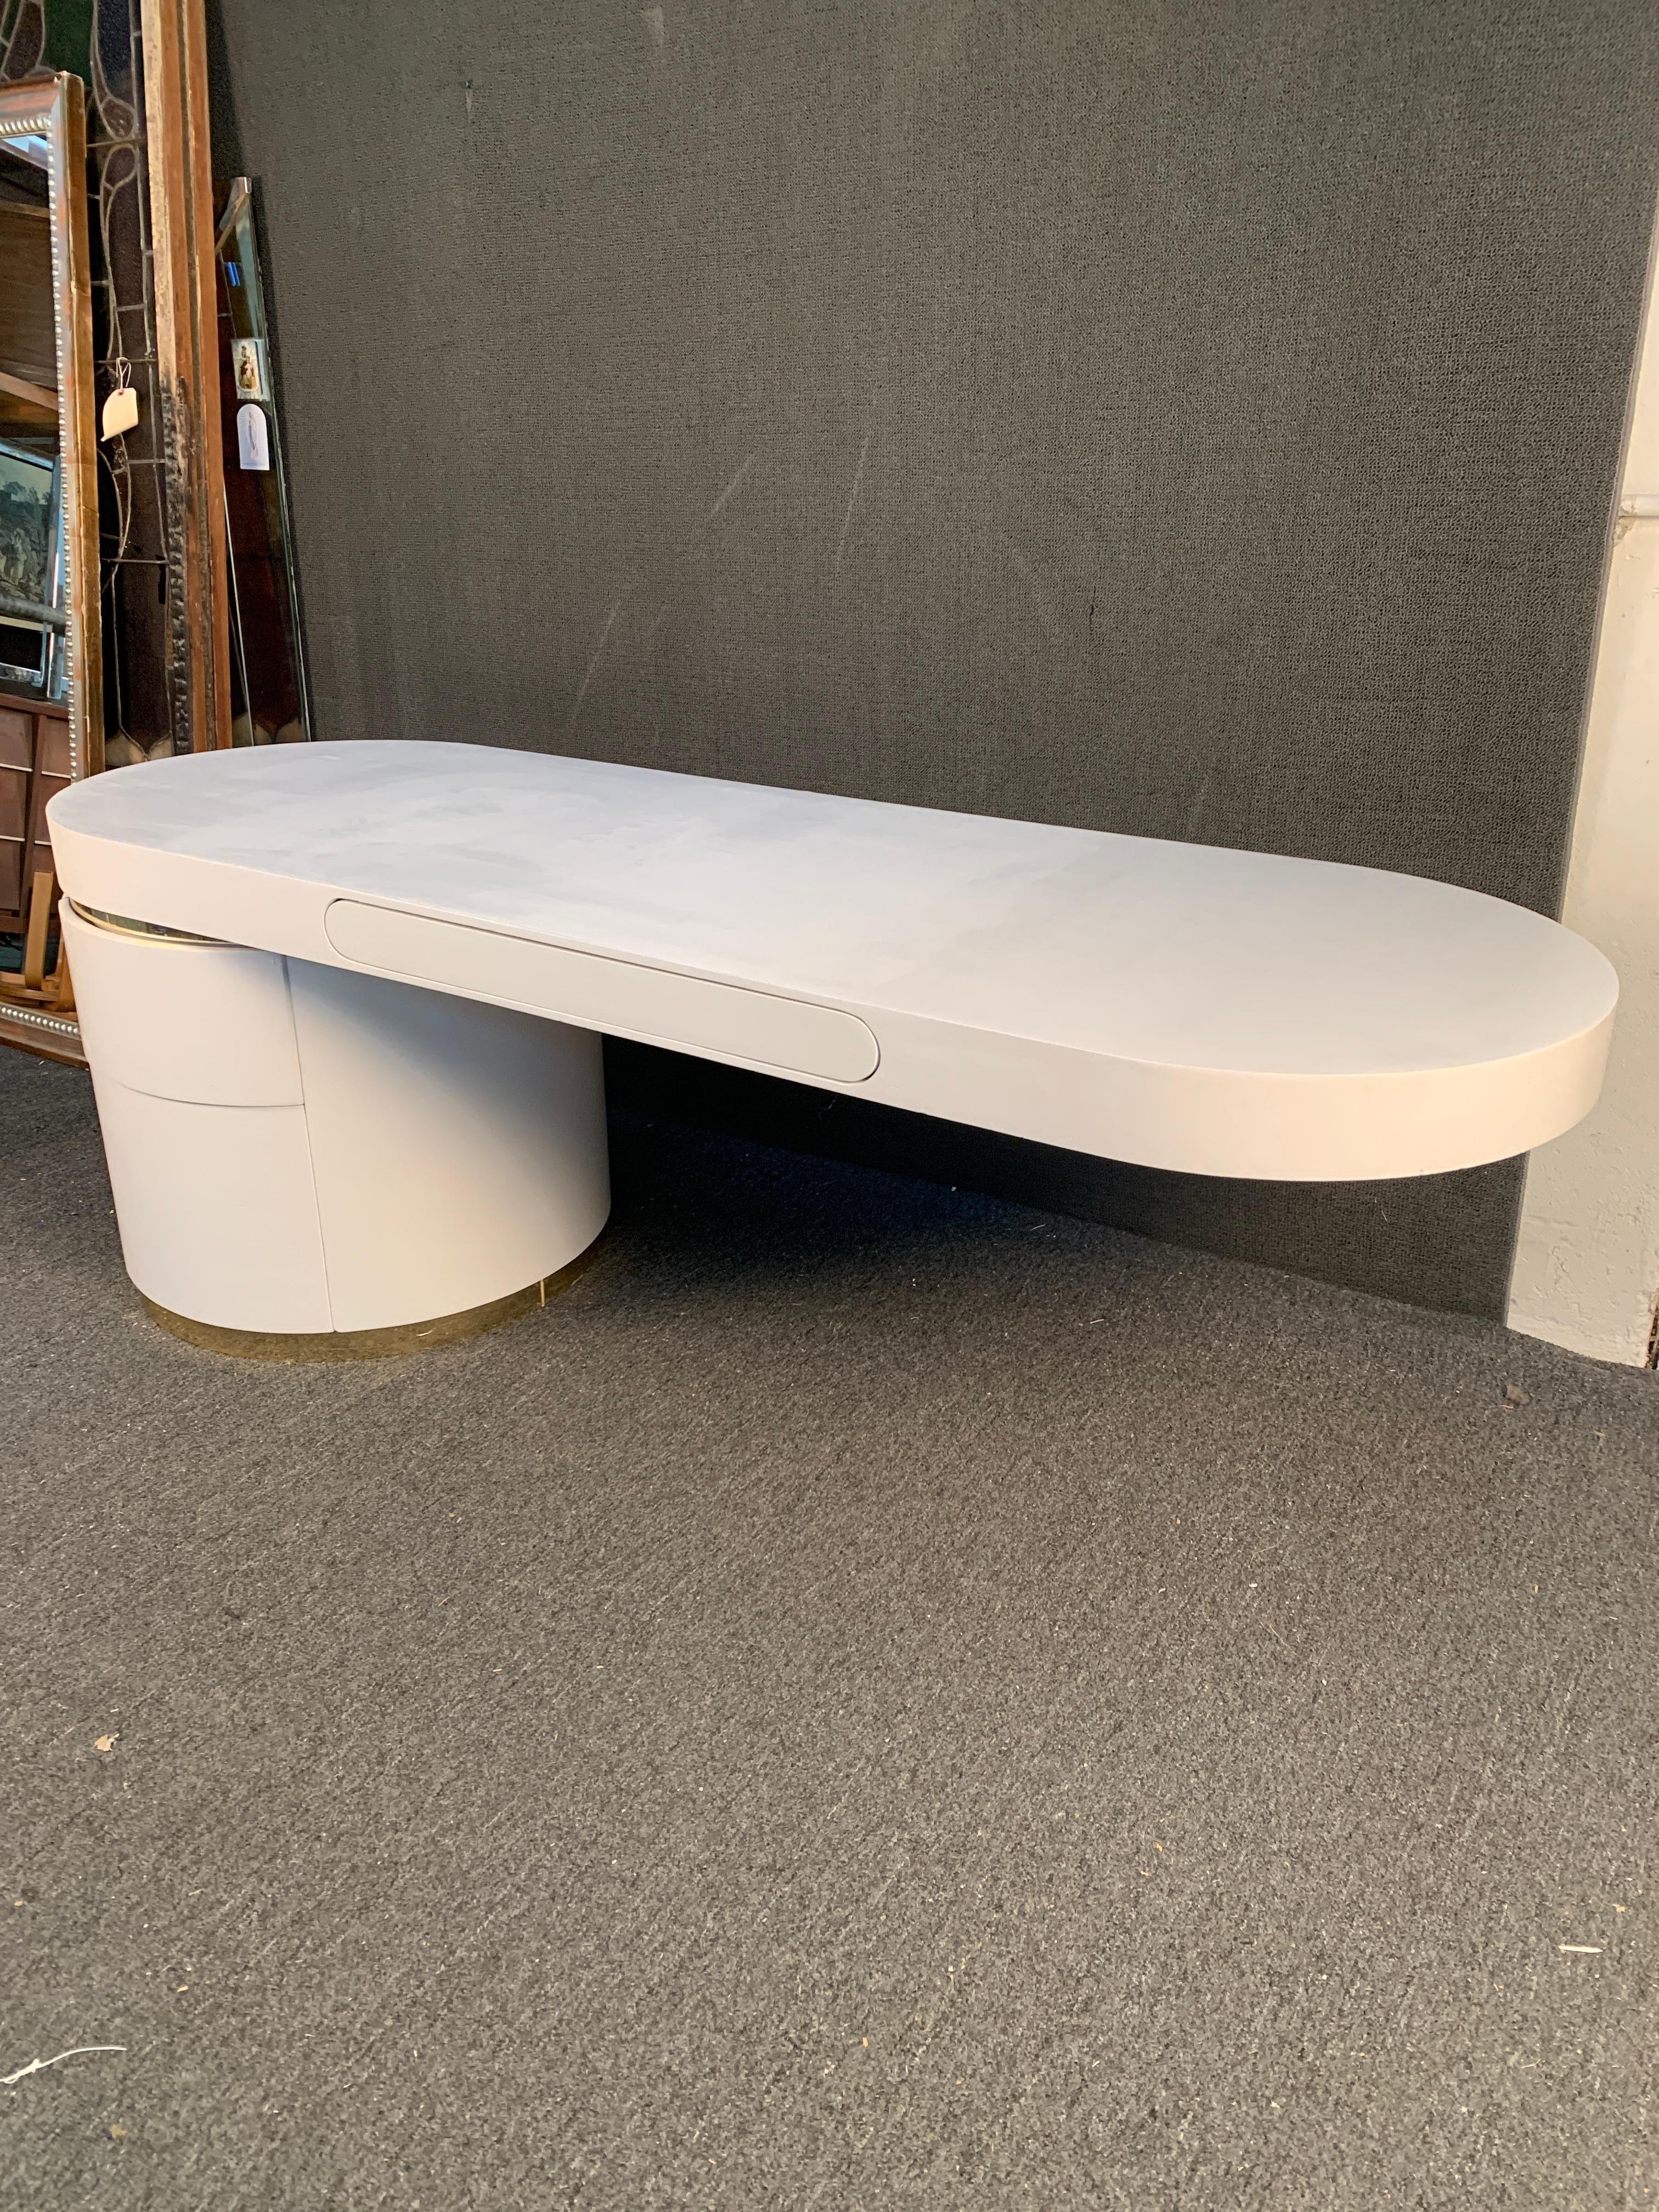 This unique contemporary modern pedestal desk features stunning cantilever design with three spacious drawers for storage. Unique goatskin style finish is accented by brass colored metal trim. Simple clean lines add to the futuristic appeal of this